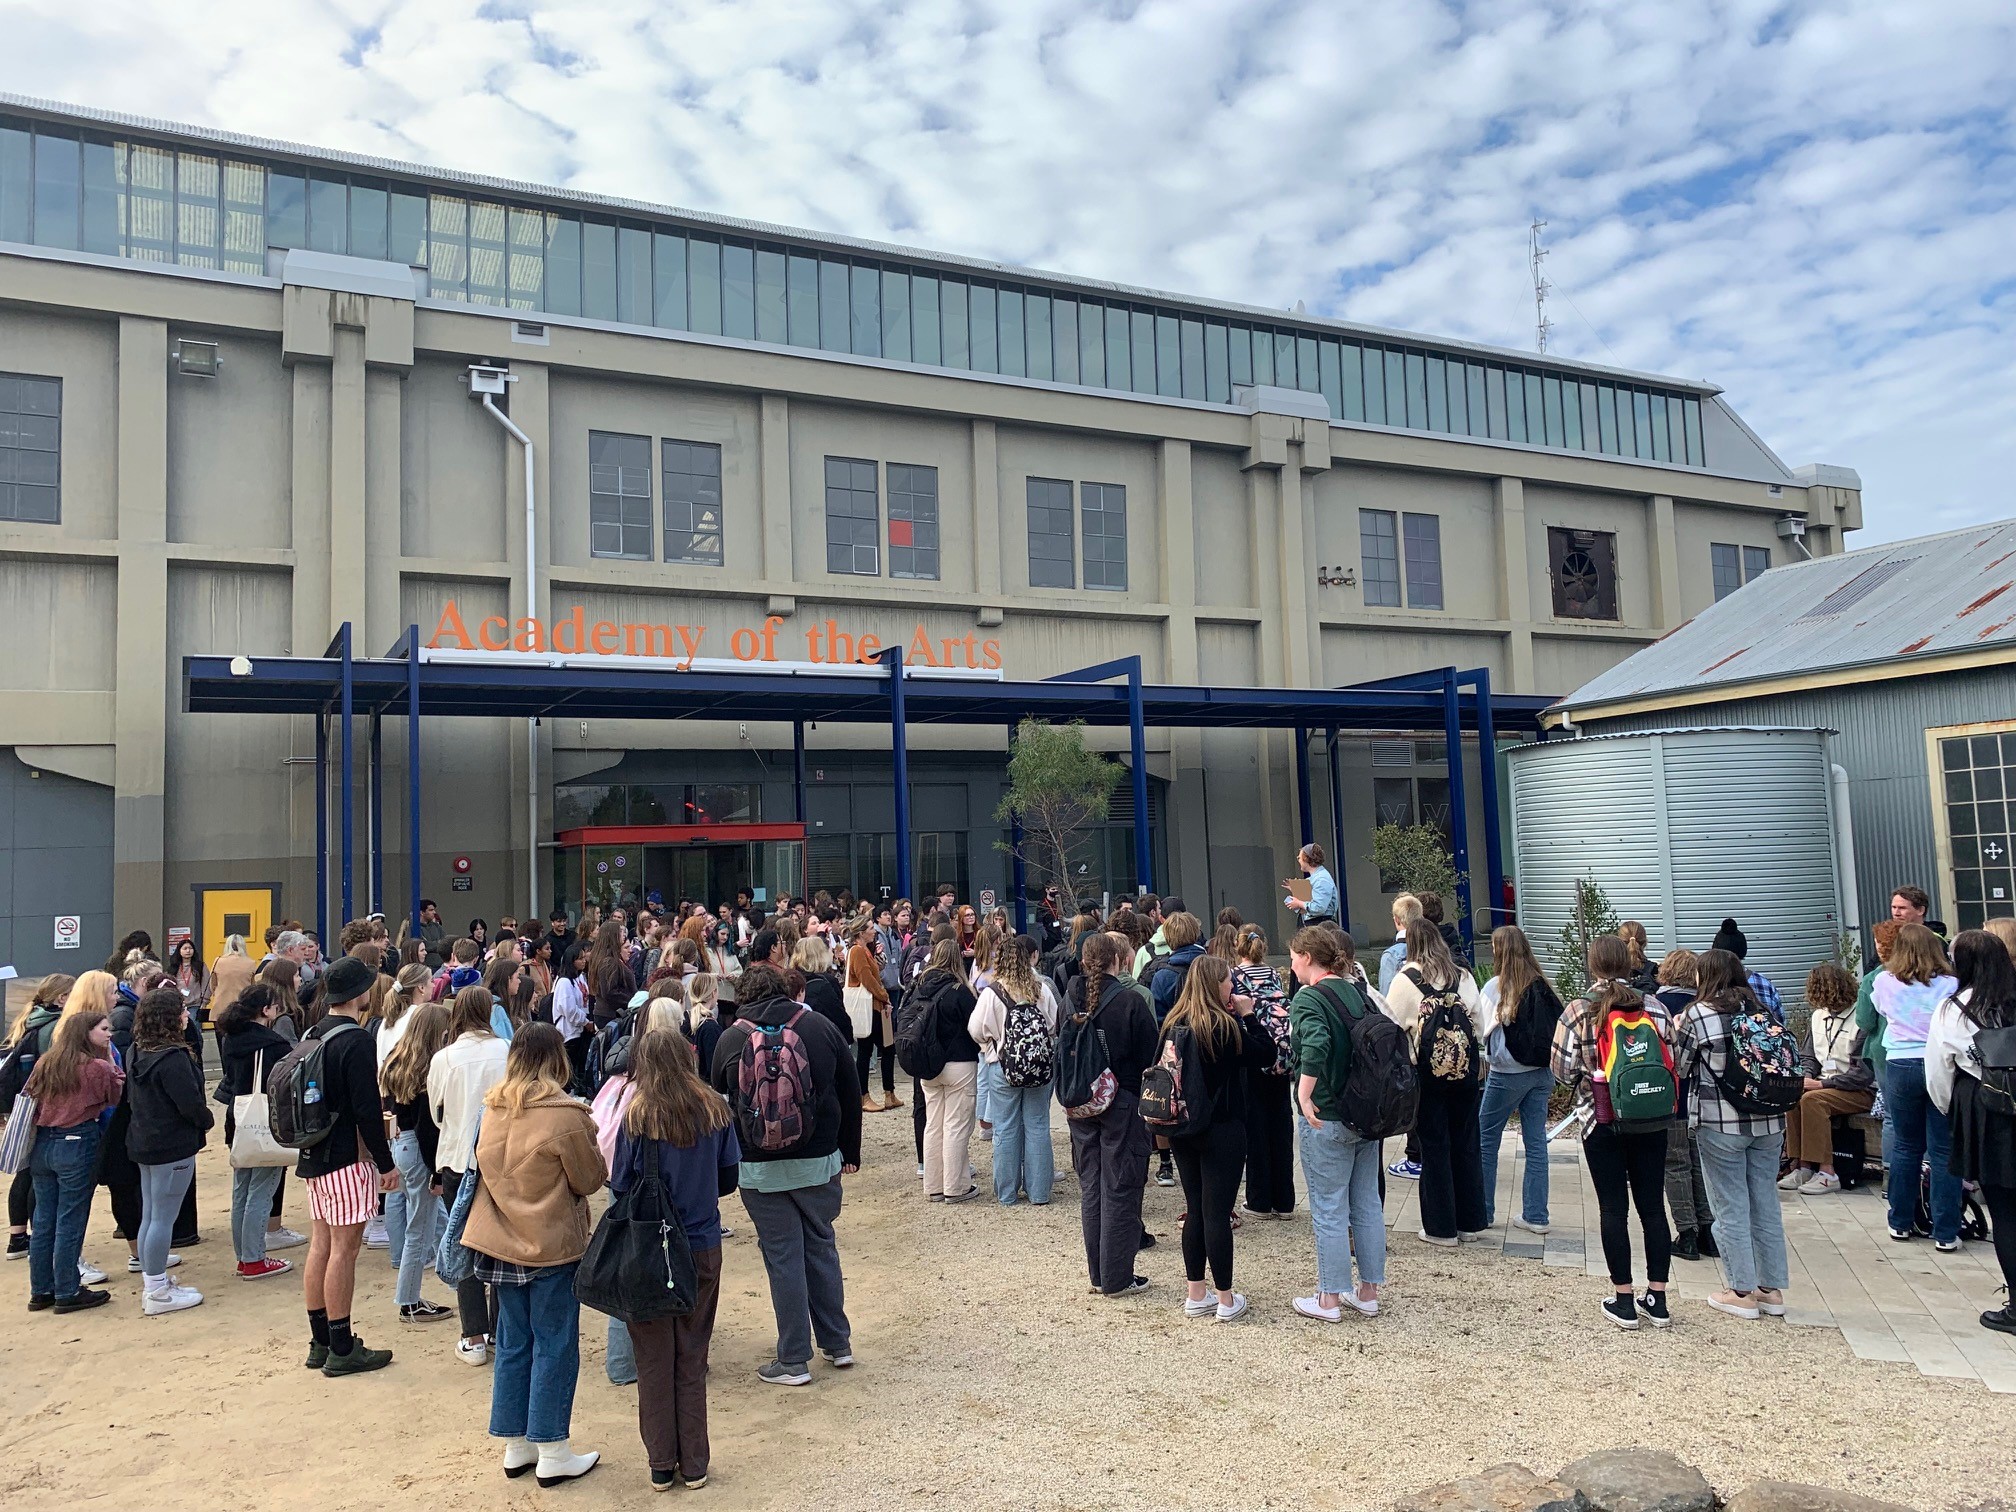 A large group of secondary school students gather outside the 'Academy of the Arts' building at the University of Tasmania's Inveresk campus